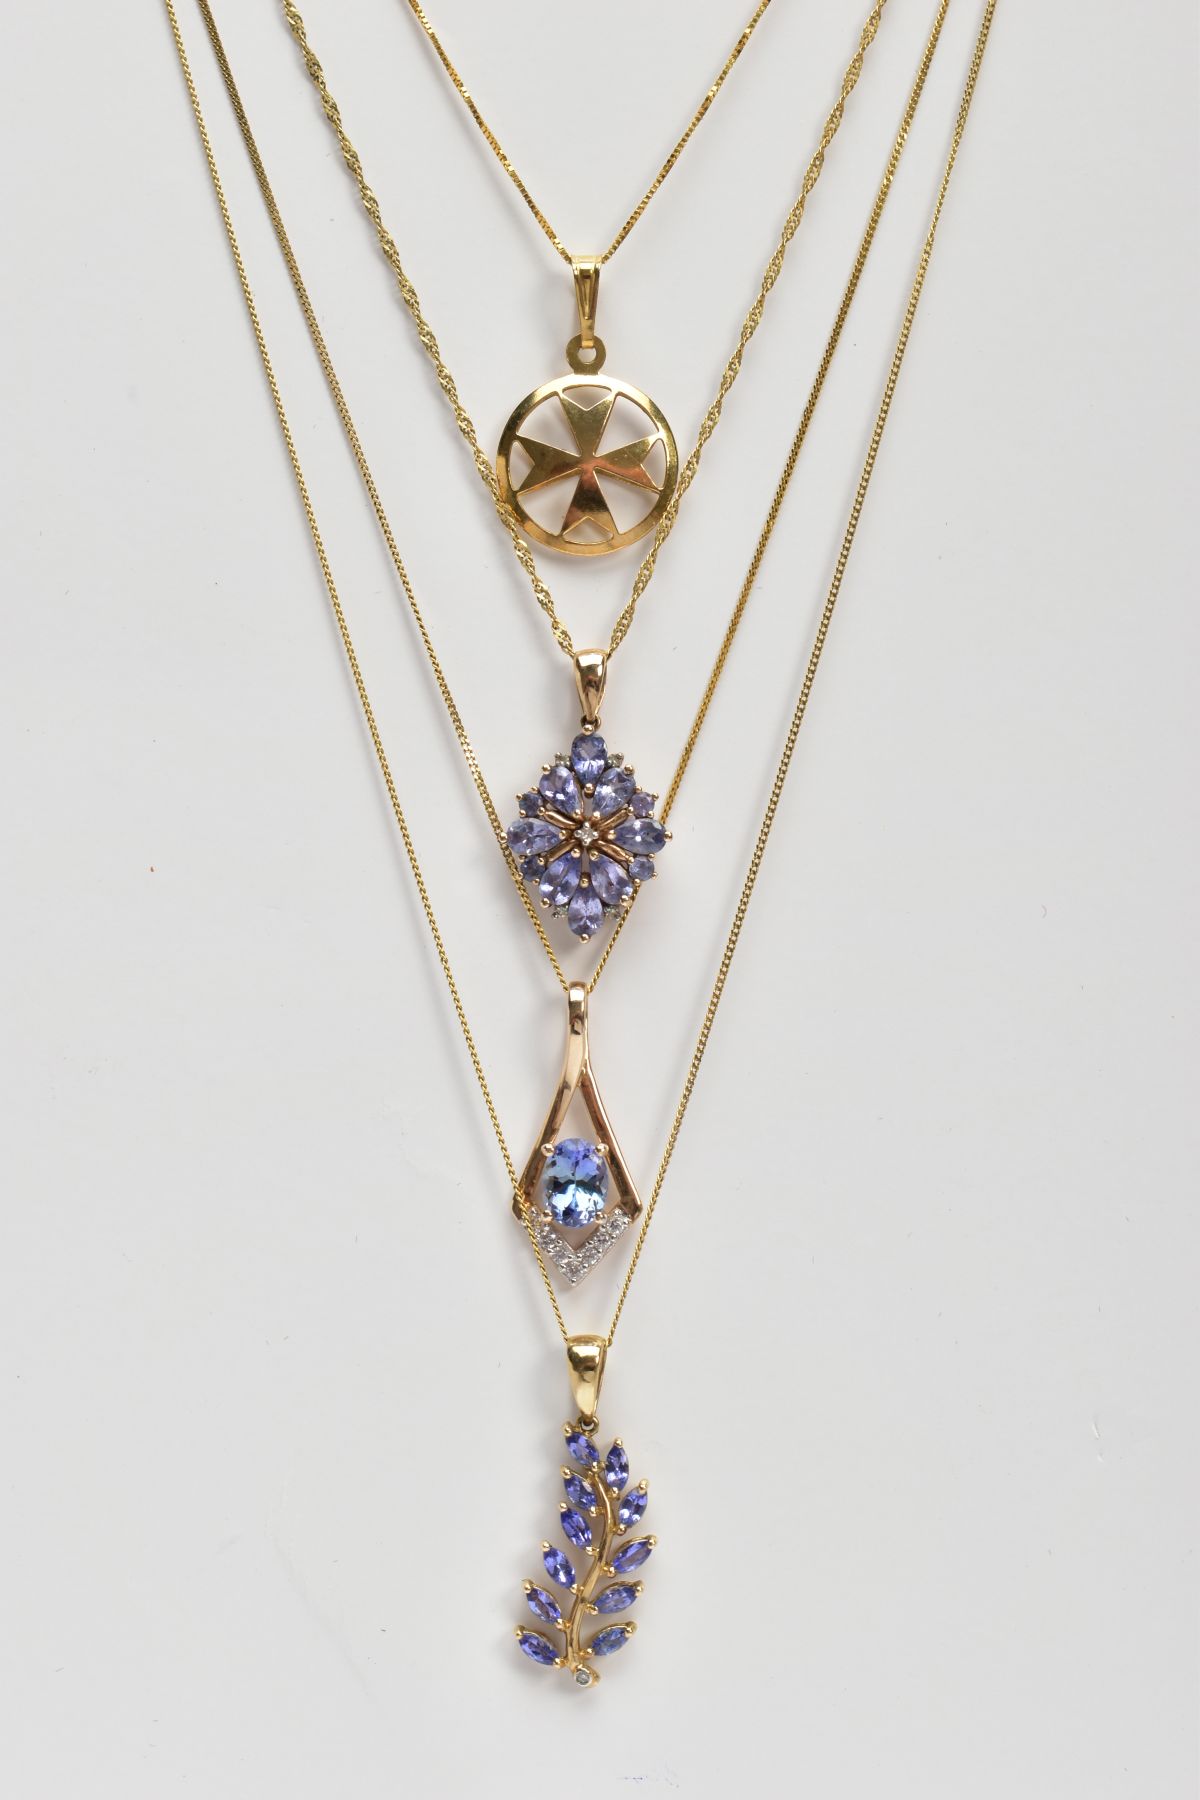 THREE 9CT GOLD GEM SET PENDANT NECKLACES AND A GOLD PENDANT NECKLACE, the gem set pendants set - Image 2 of 4